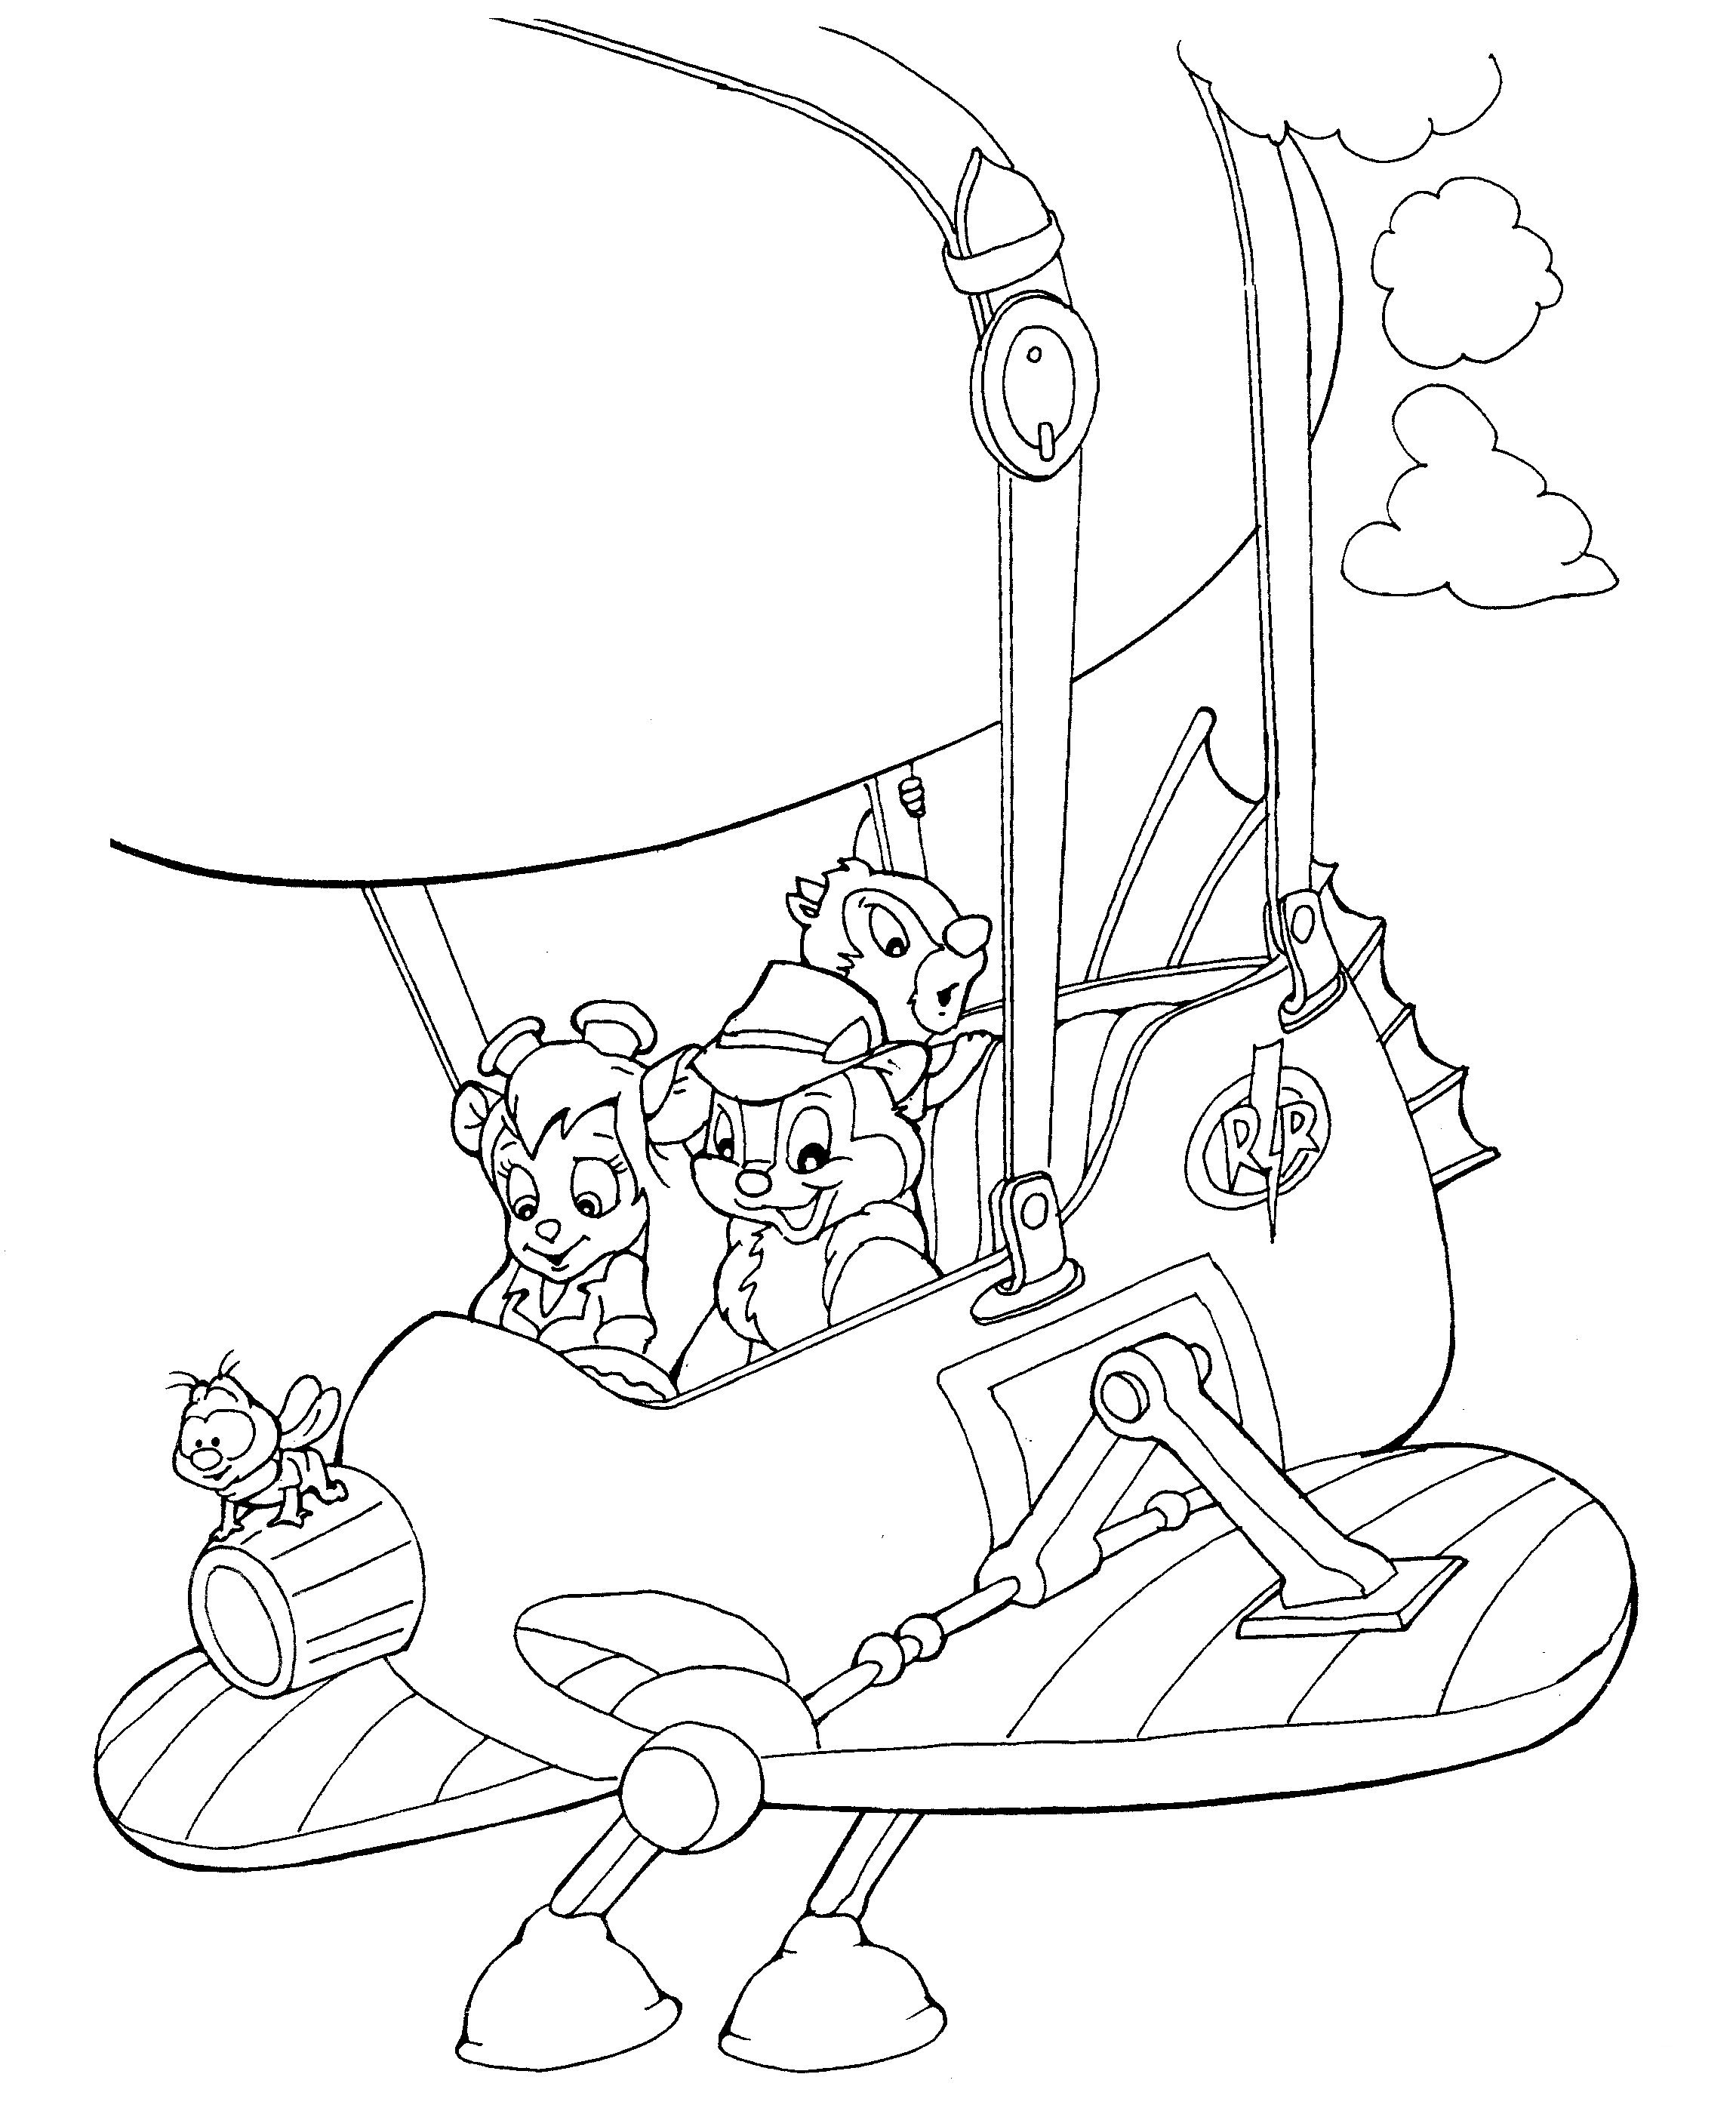 Coloring page - Team Assistance